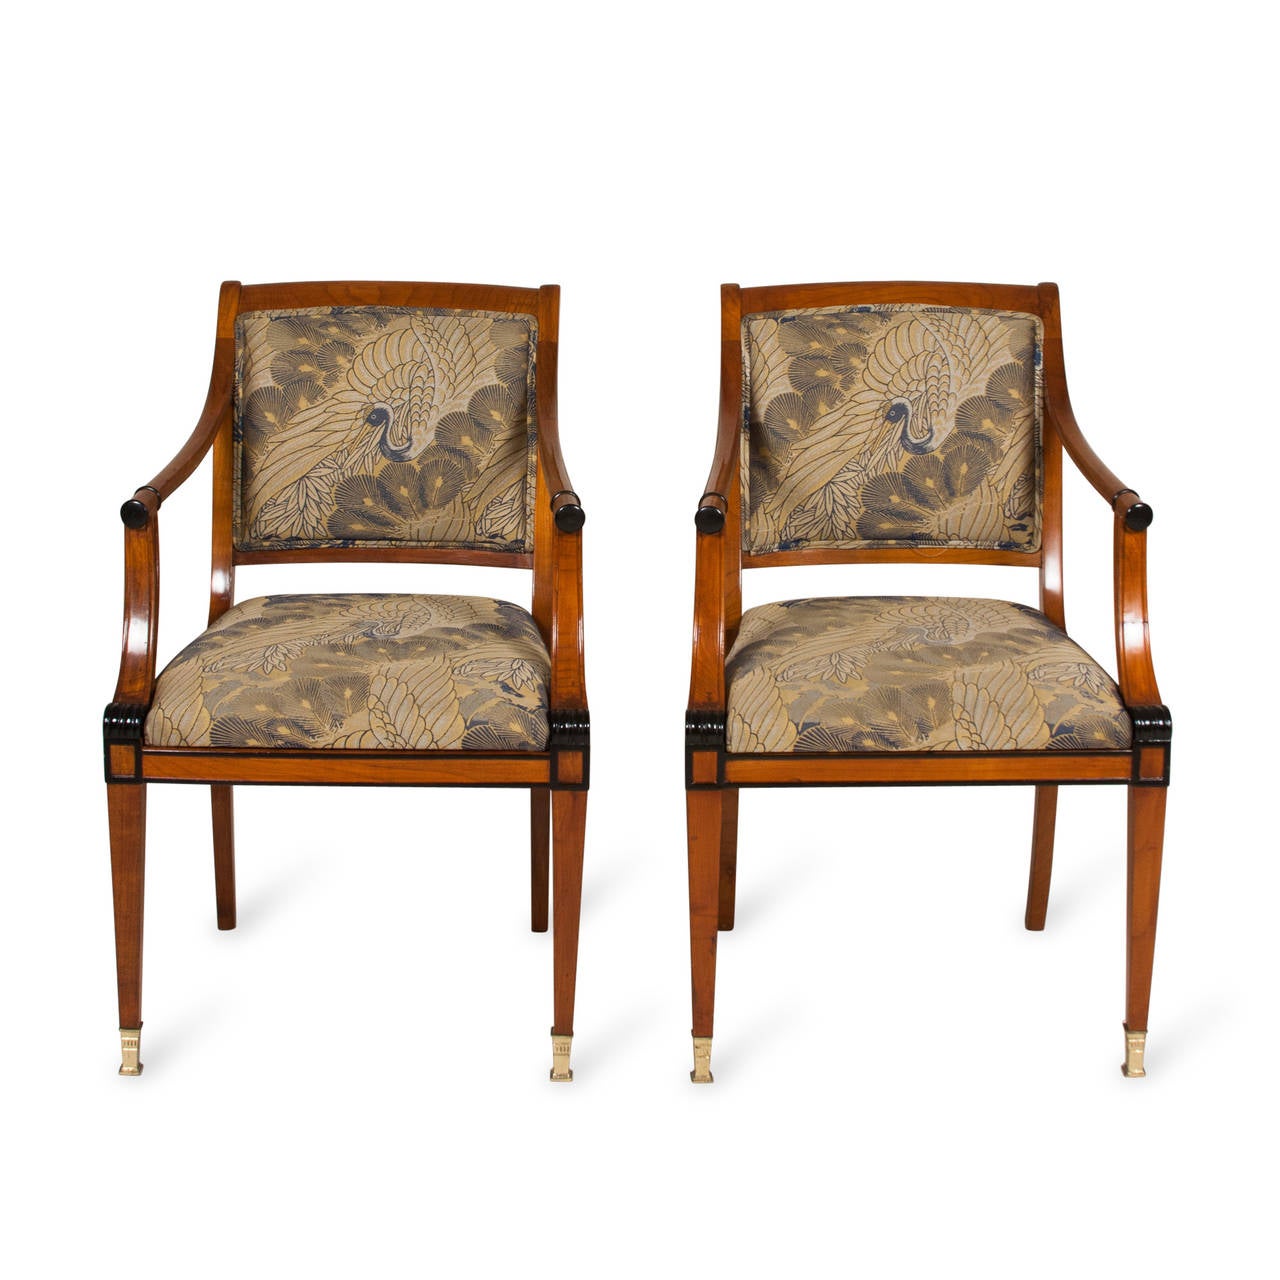 Pair of fruitwood Empire style open armchairs, gracefully arced turned arms ending in ebonized accent, the ebonized accent repeated on the front seat corner, tapered legs, bronze sabots, original silk upholstery, American 1990s. Back height 33 in,